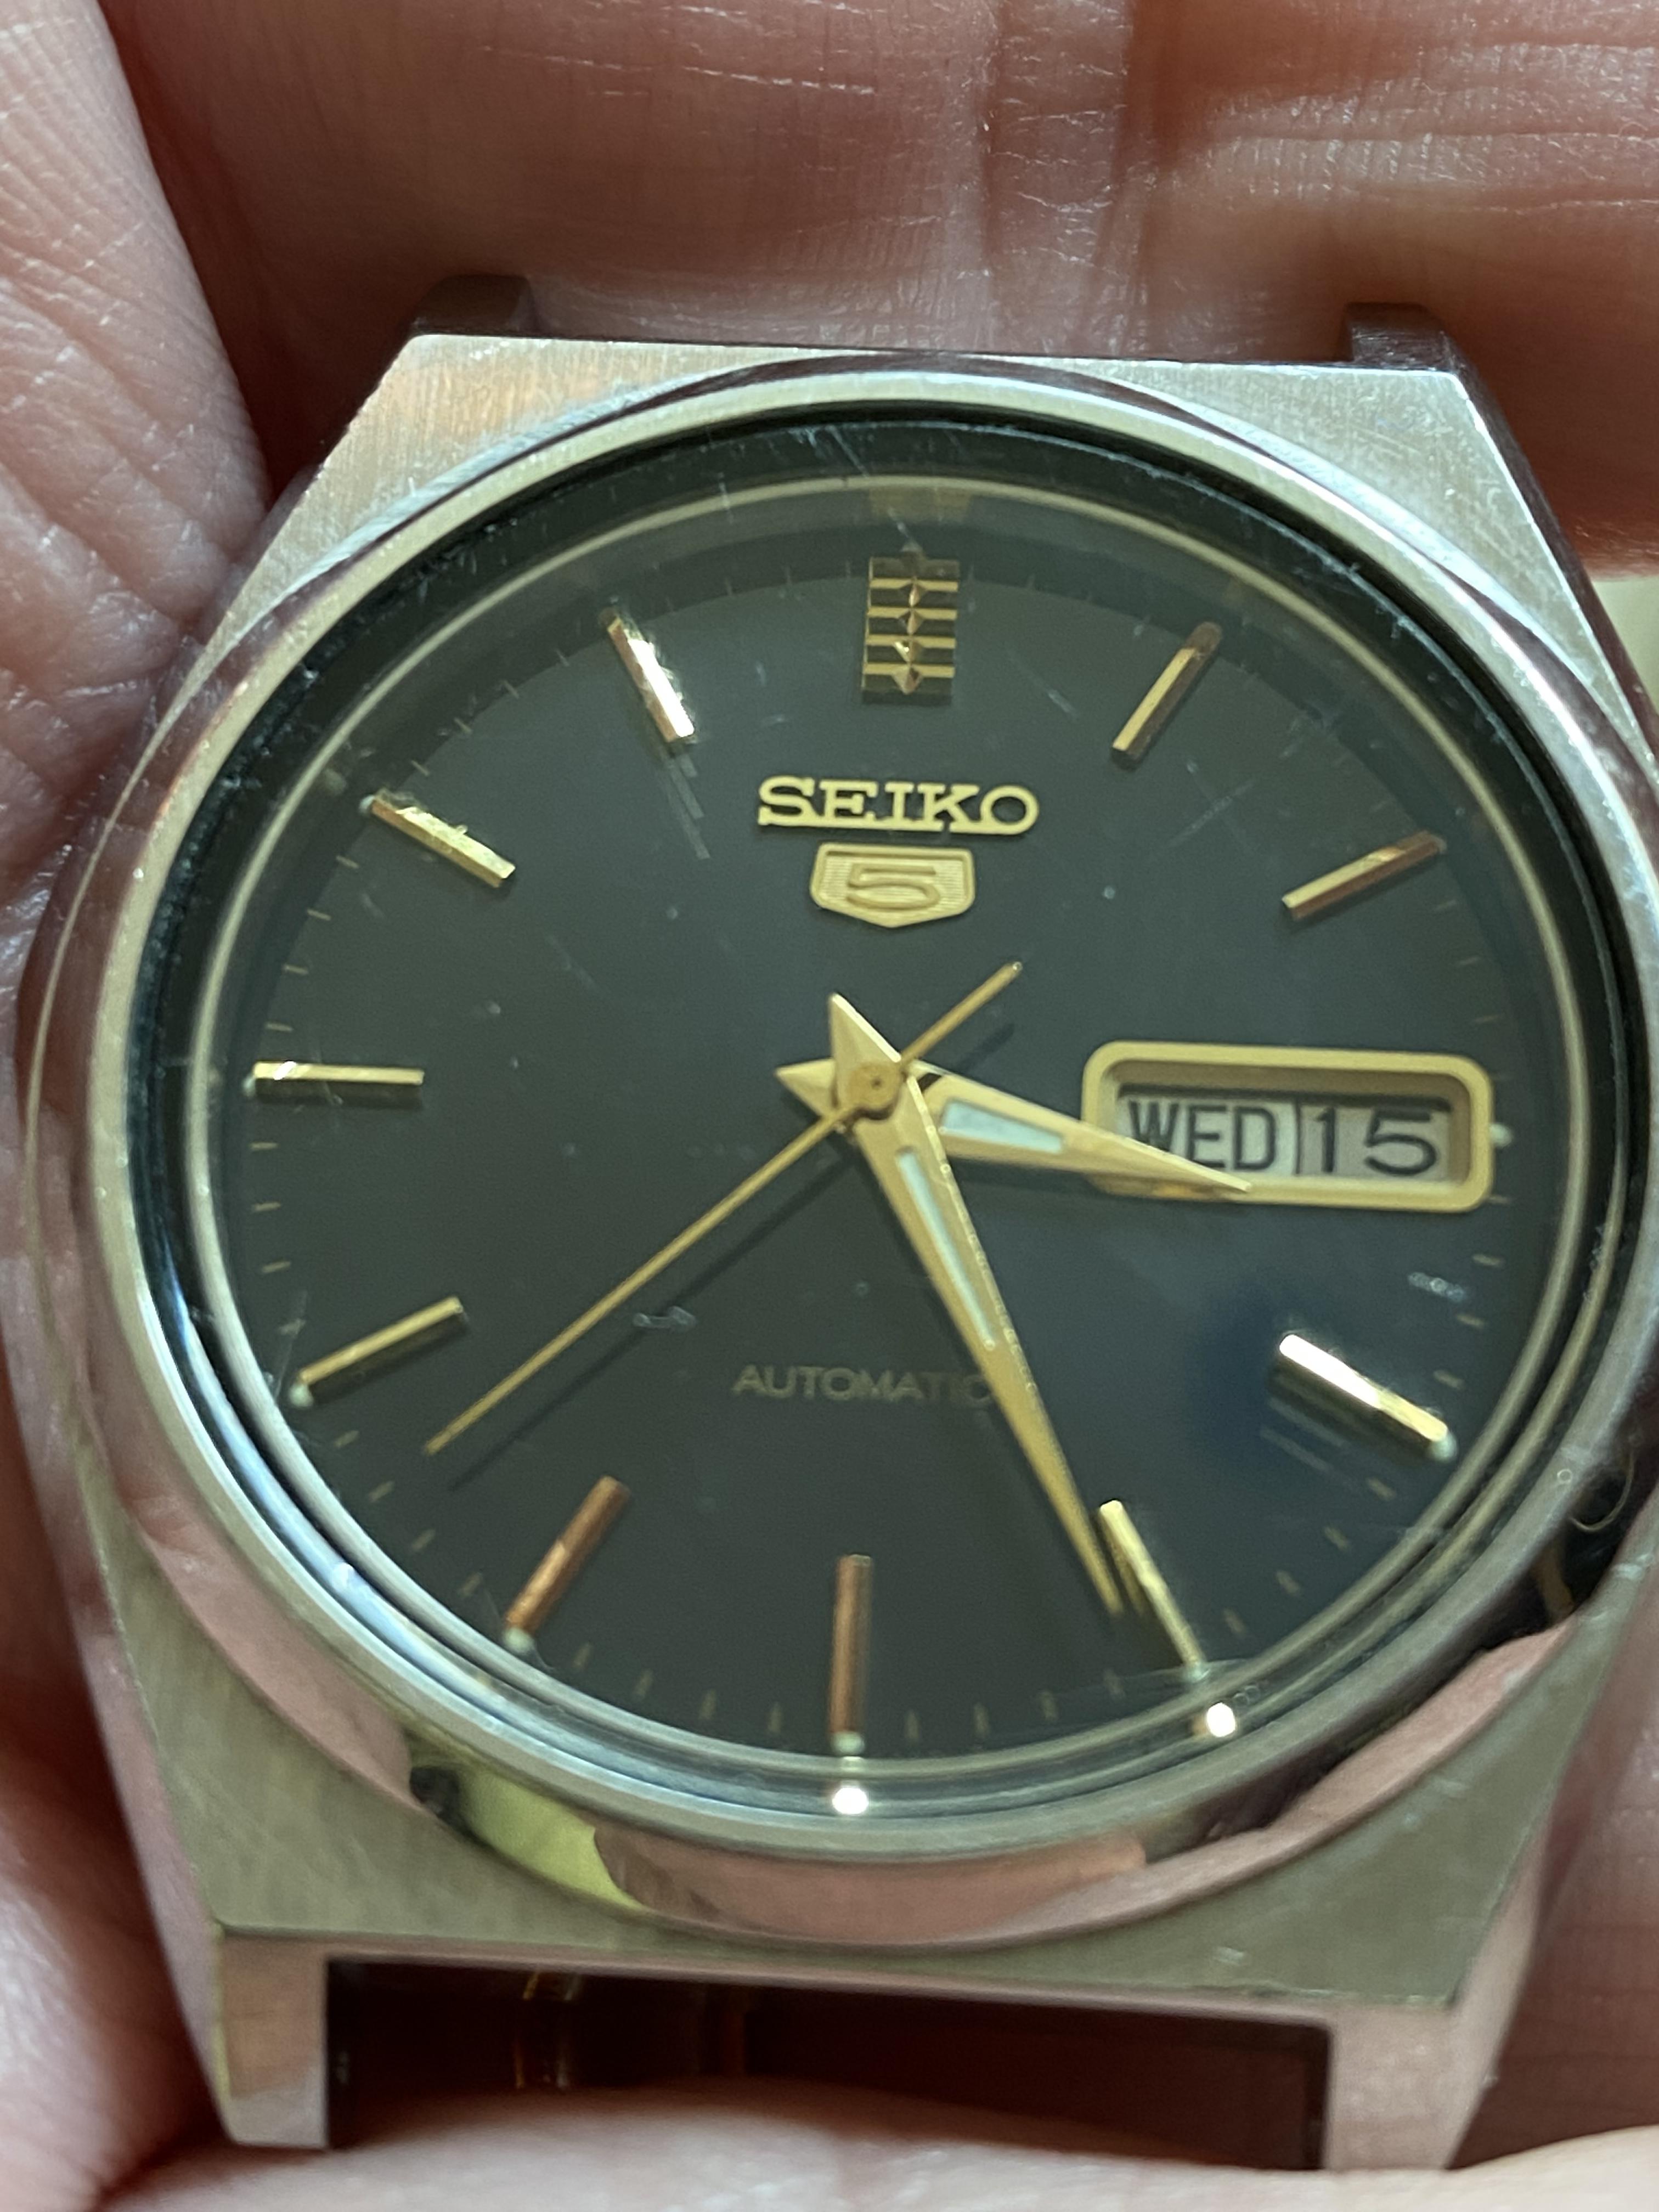 Seiko 5 watch face reference guide? - Chat About Watches & The Industry  Here - Watch Repair Talk